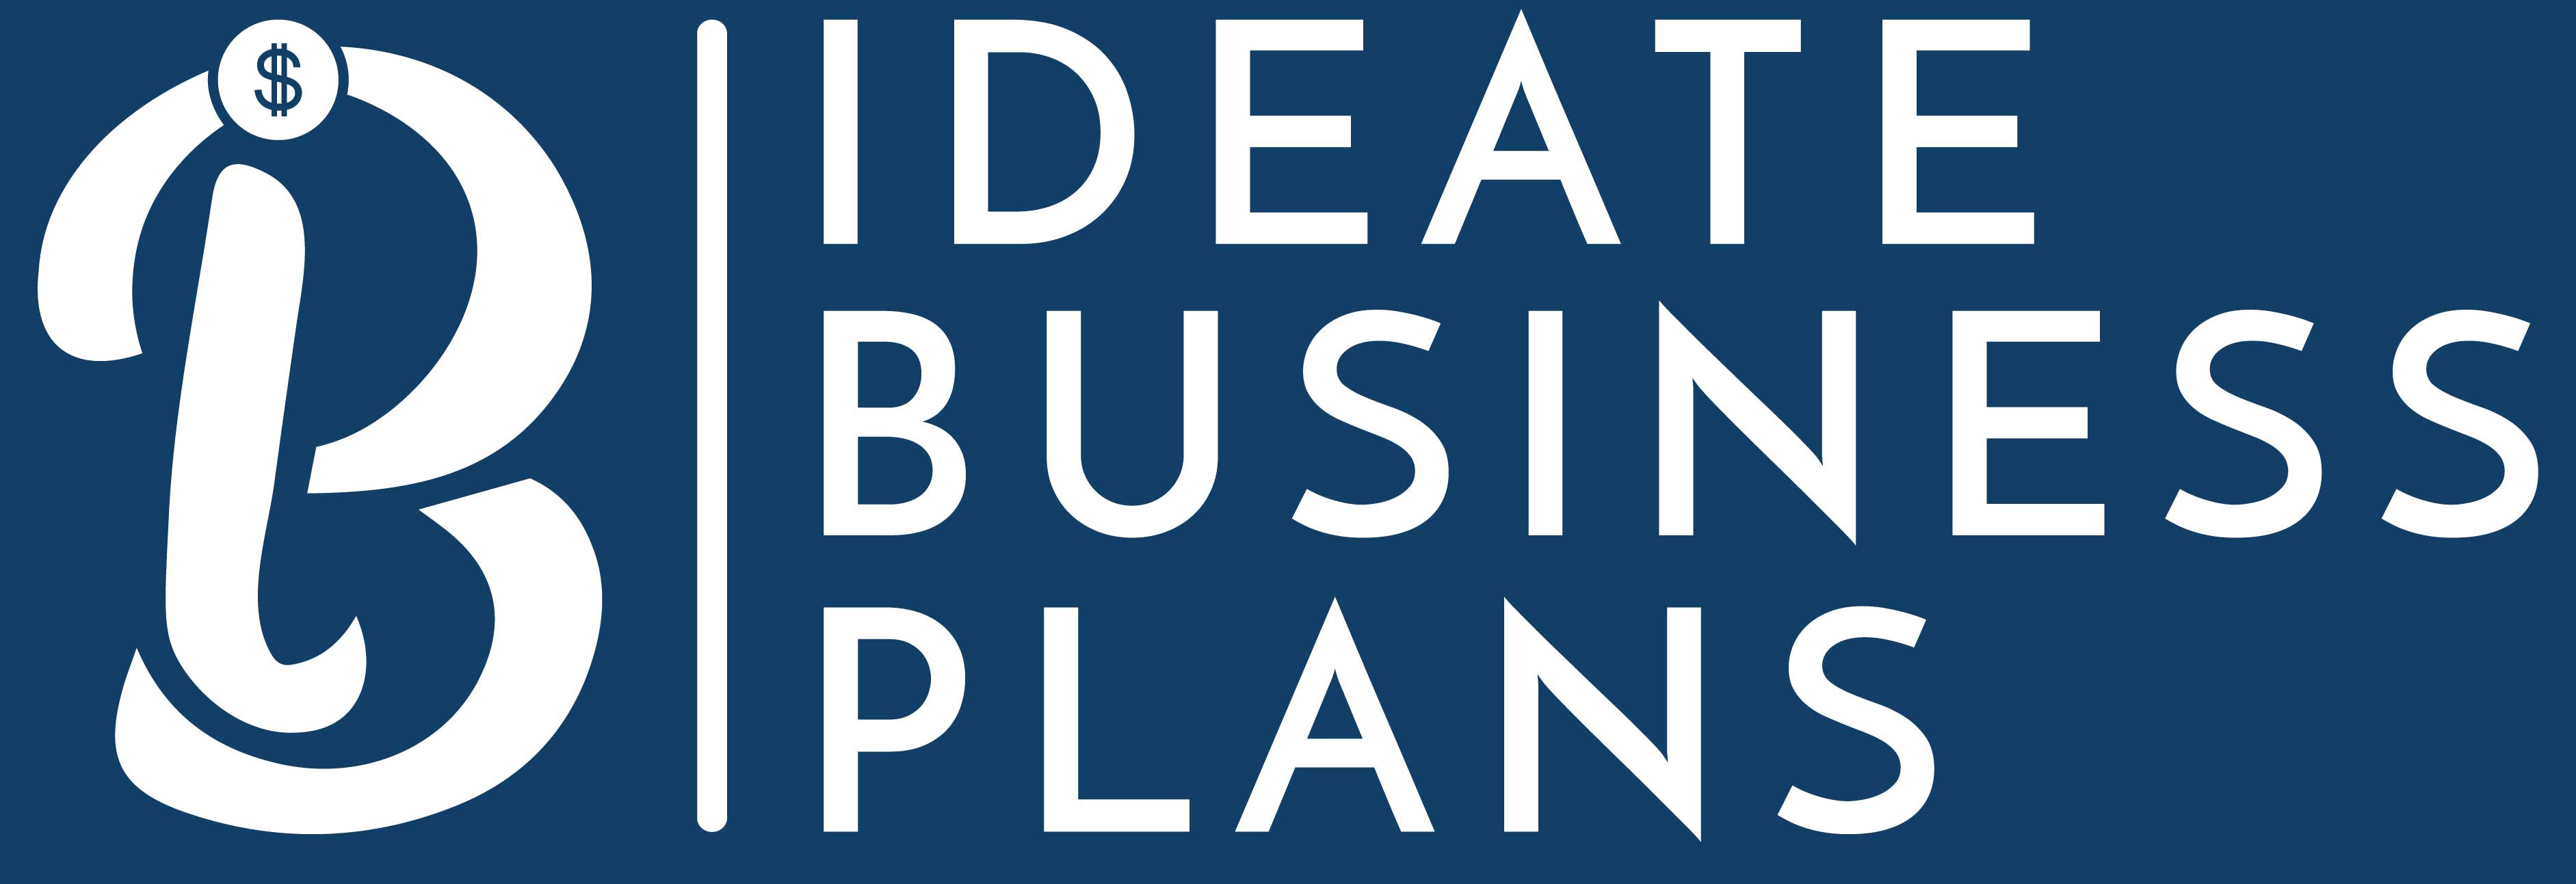 business plan for venture capital